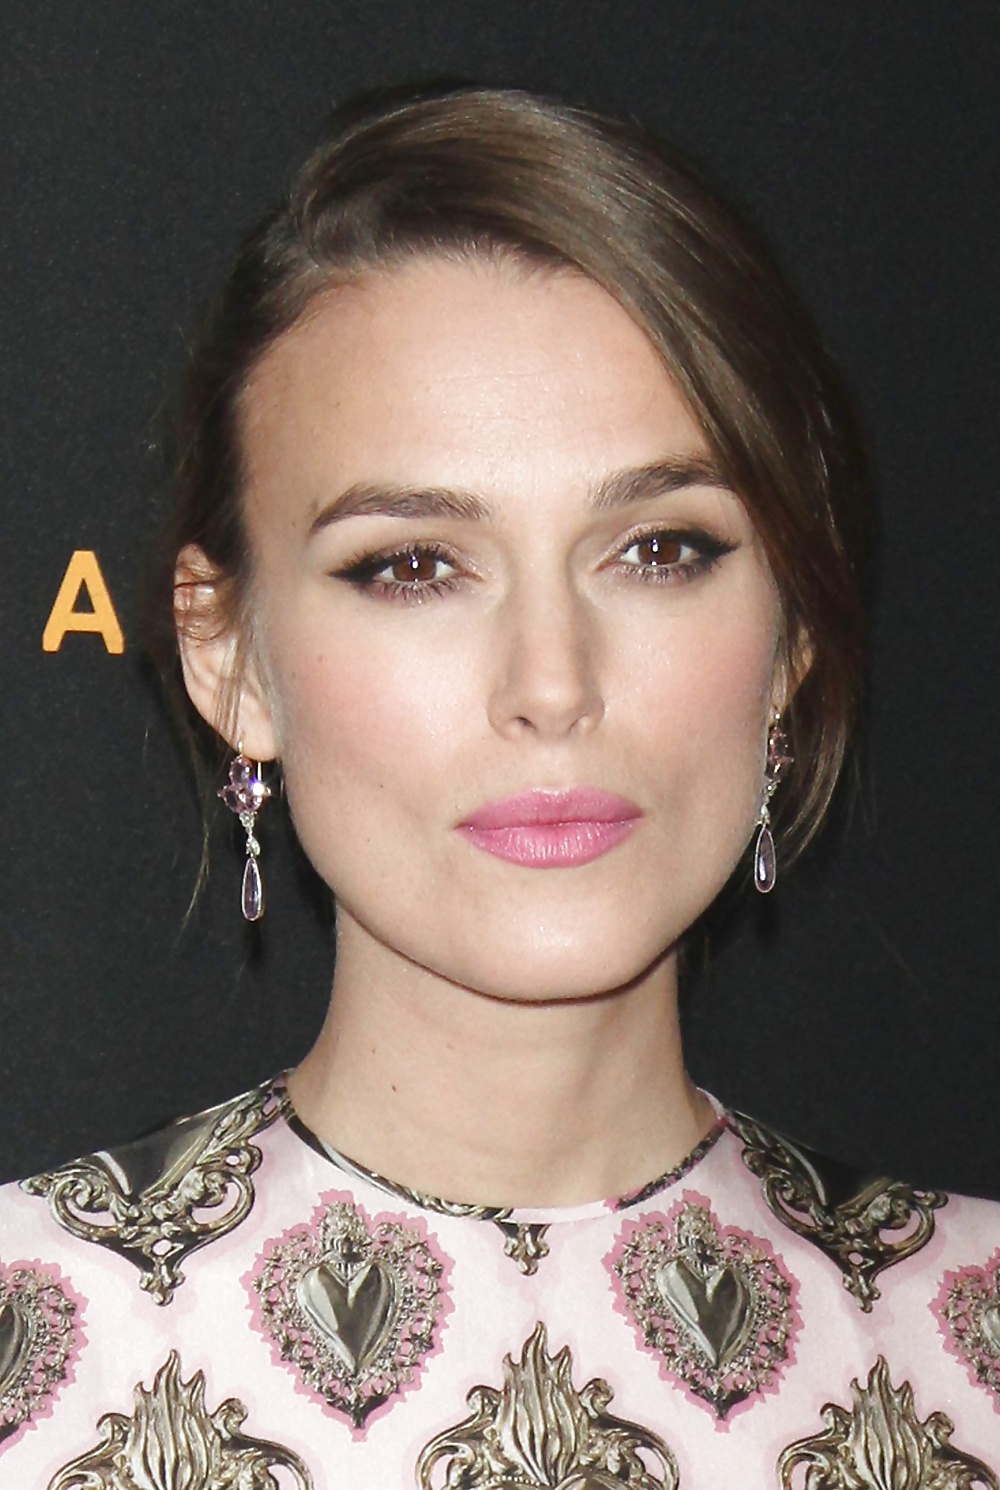 Keira Knightley The Royal Lady of England #35649453